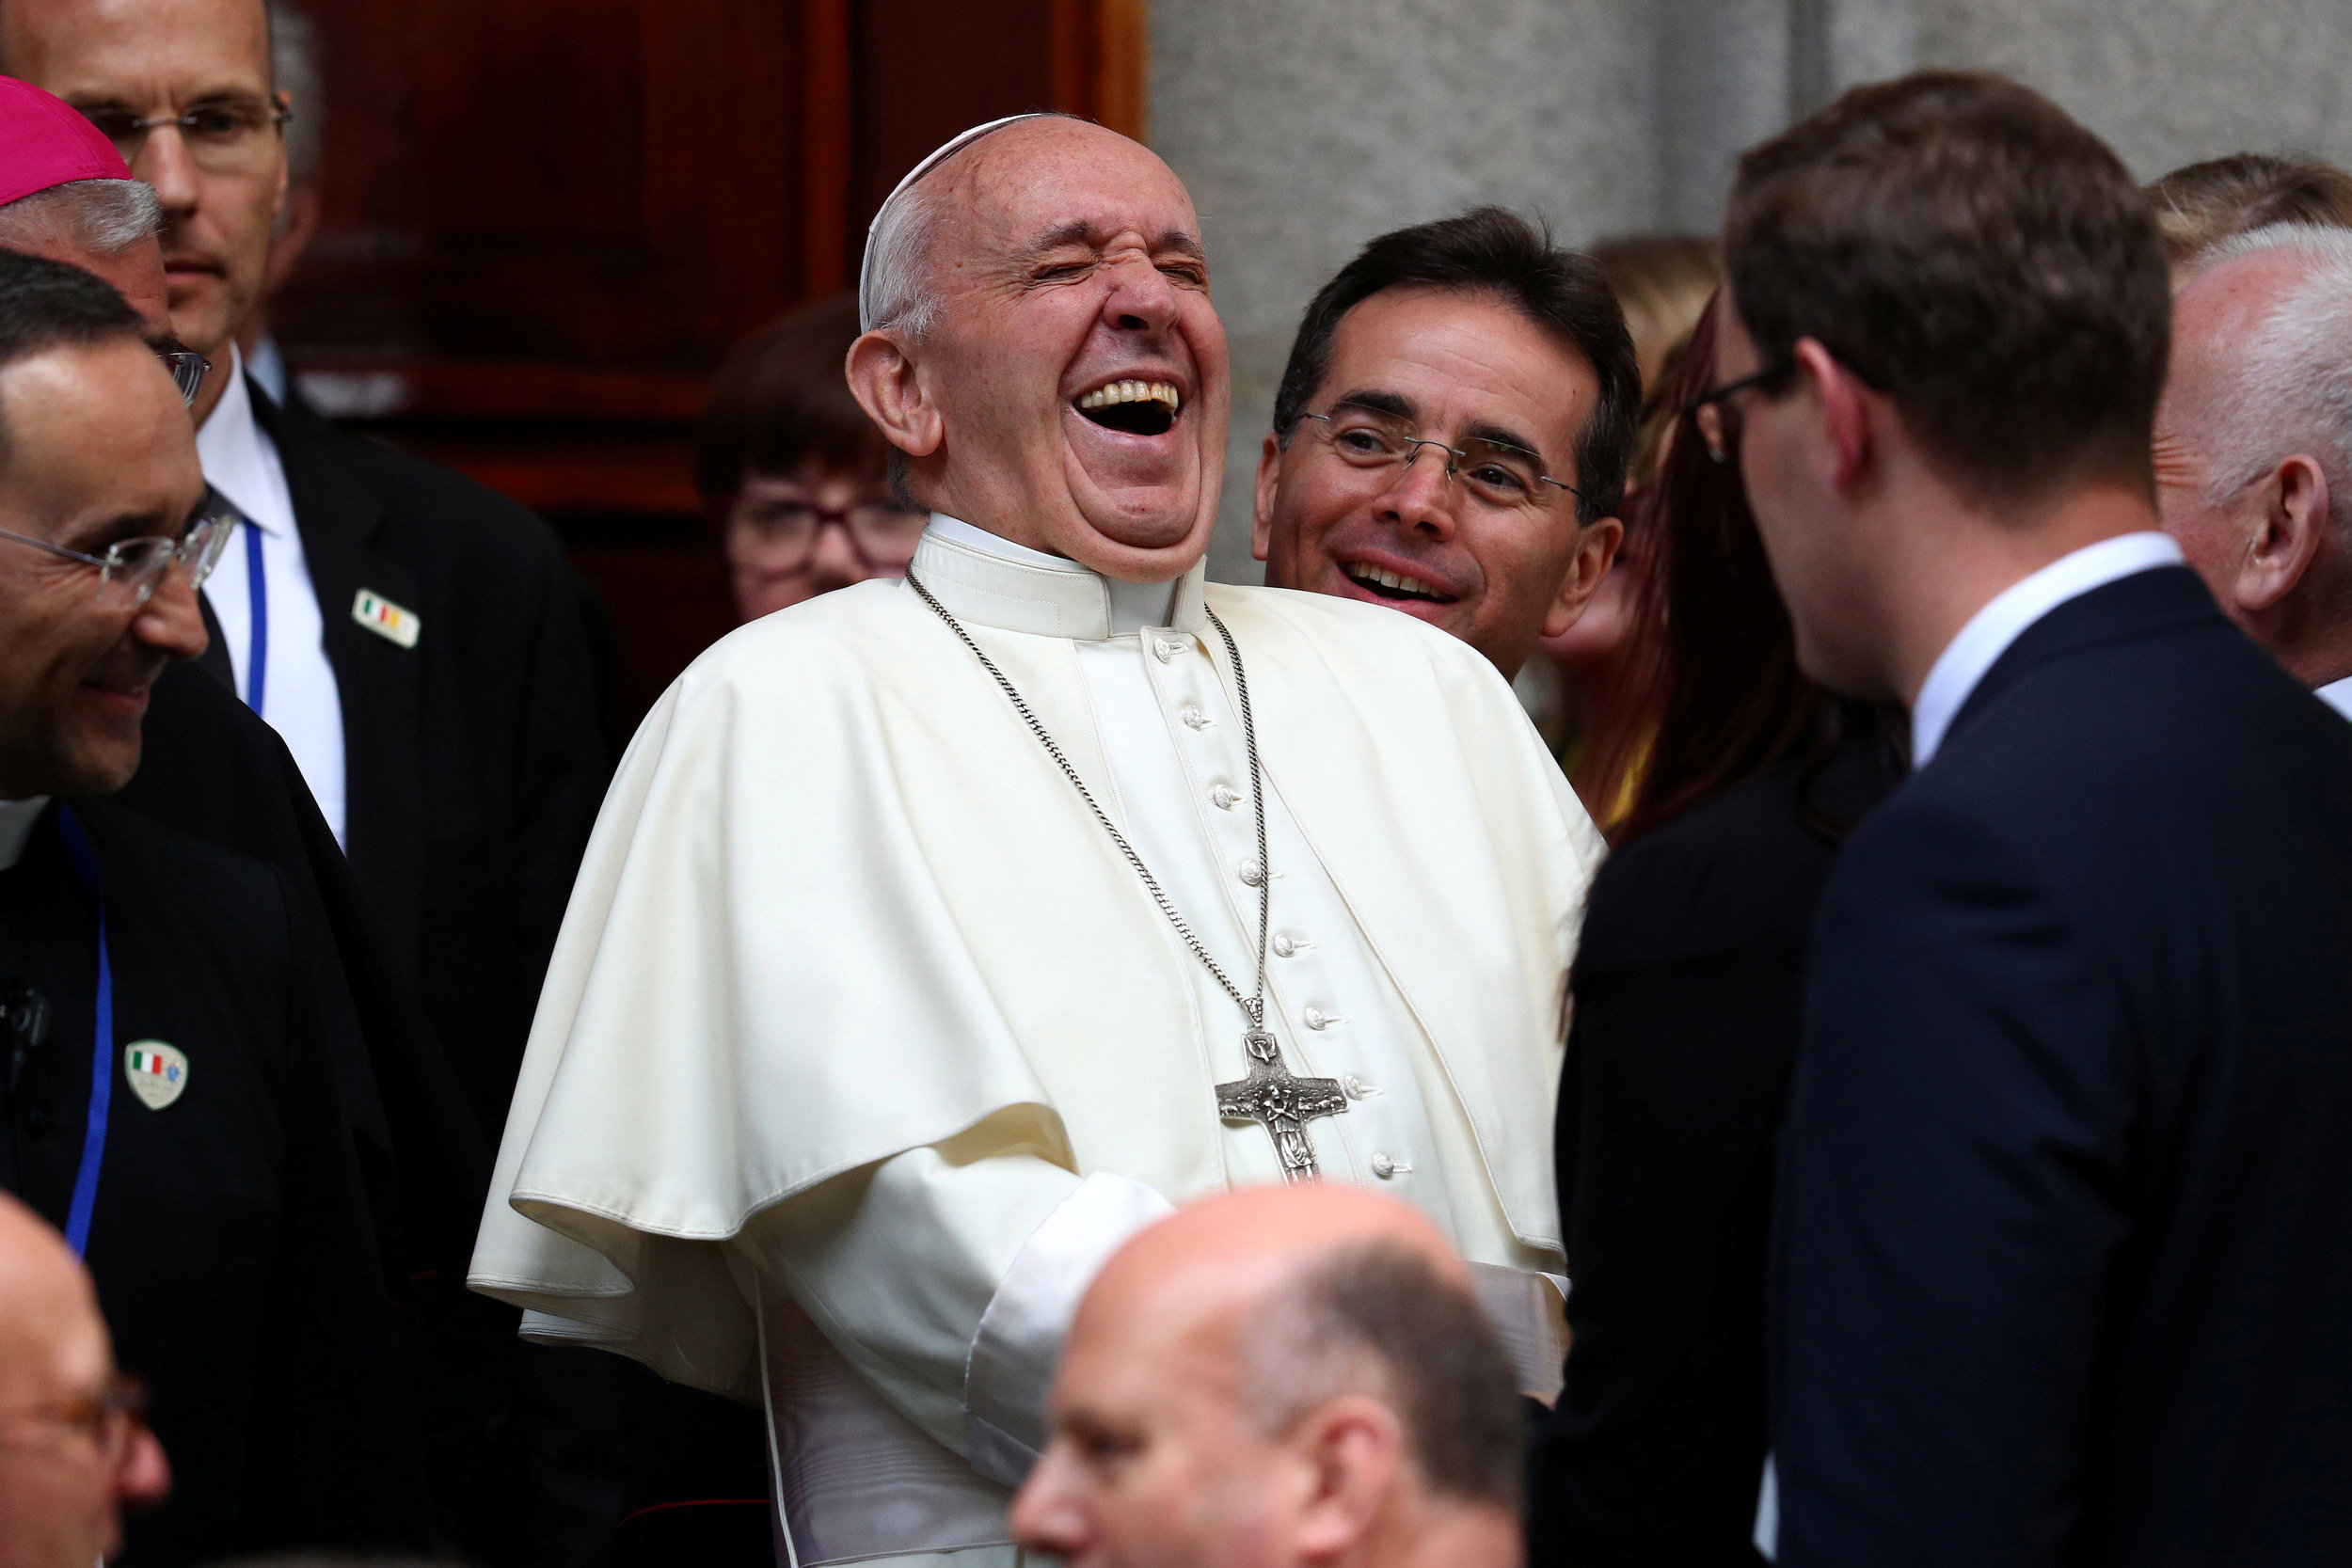  Pope Francis laughs as he leaves St Mary's Pro-Cathedral during his visit to Dublin.
Photo by Hannah McKay, 02 December 2018
 